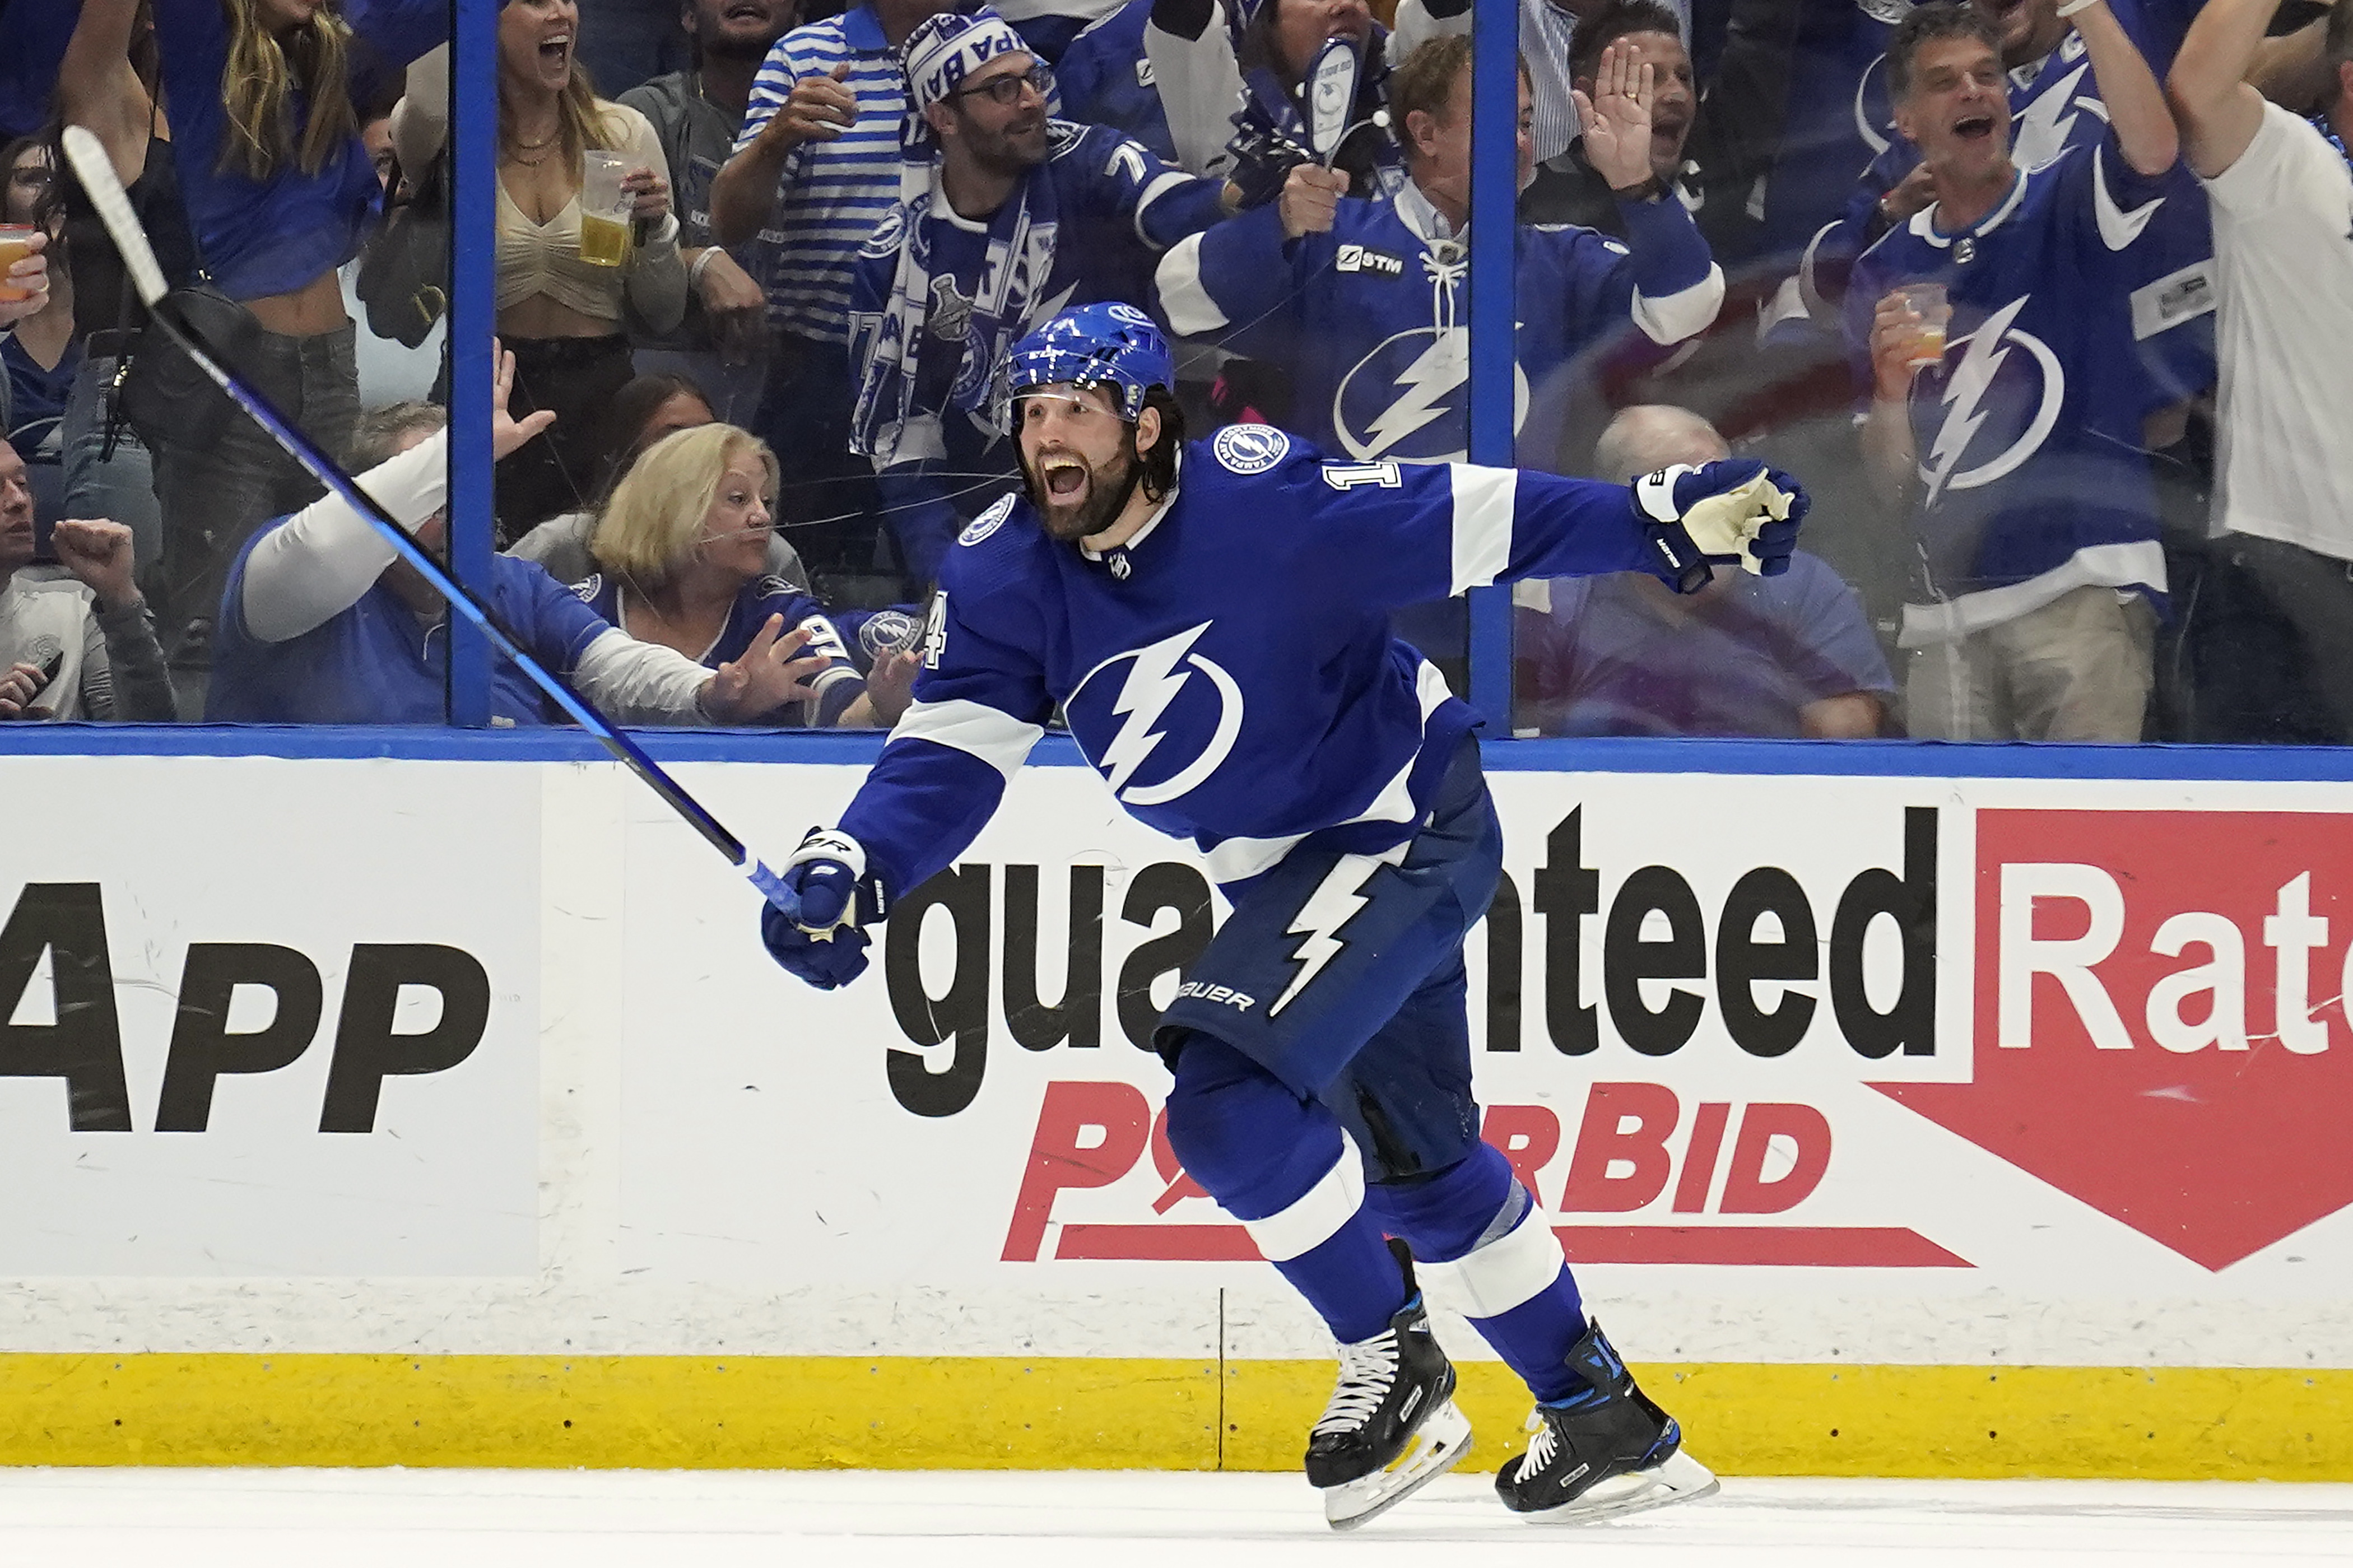 Panthers vs Lightning: 2022 NHL Stanley Cup Playoffs preview, odds